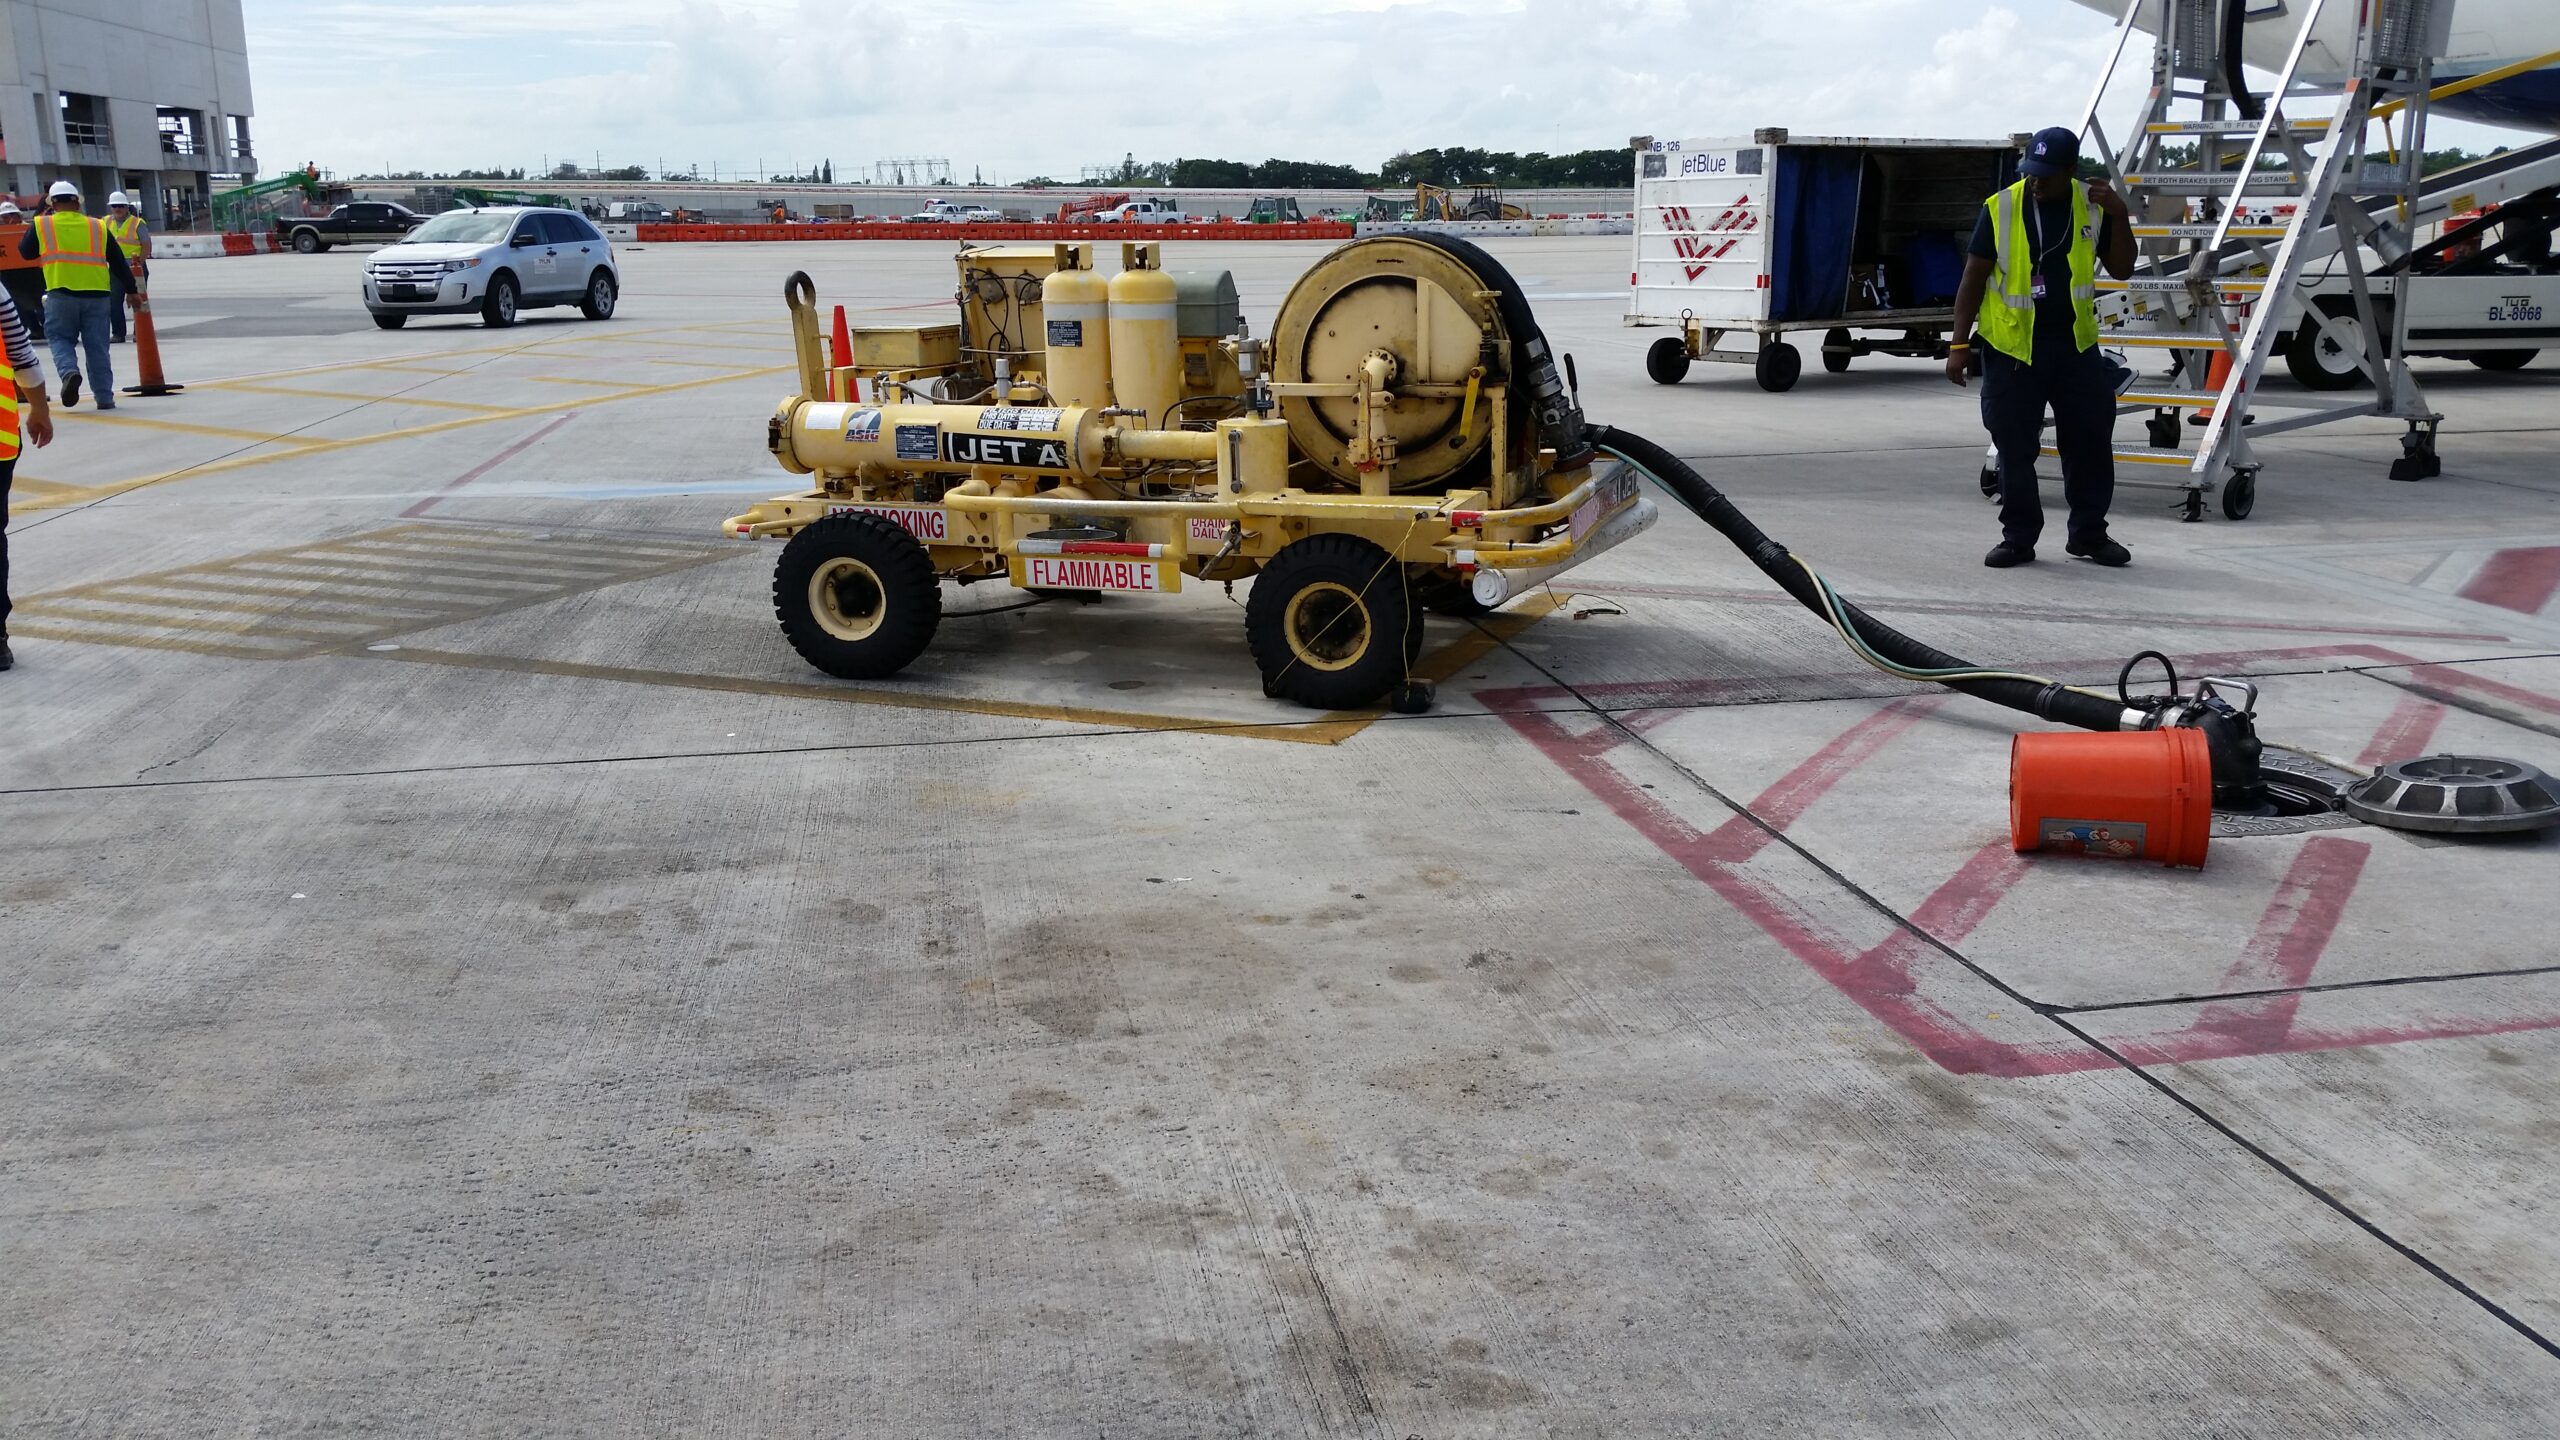 Fort Lauderdale International Airport - T-4 Hydrant Fueling System Infrastructure 2 Carley Smith